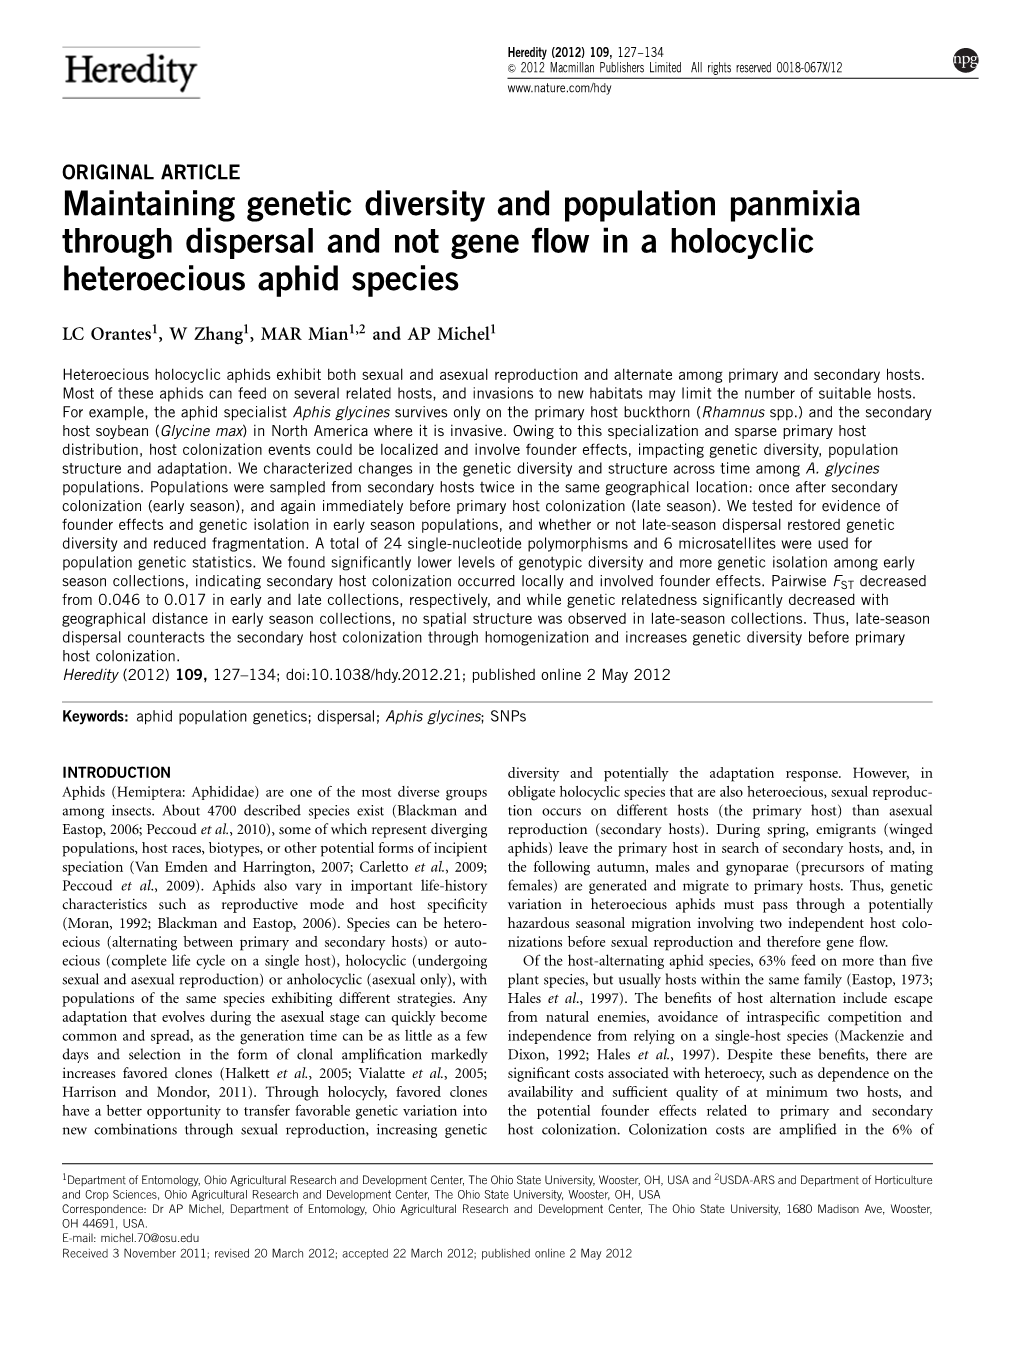 Maintaining Genetic Diversity and Population Panmixia Through Dispersal and Not Gene ﬂow in a Holocyclic Heteroecious Aphid Species